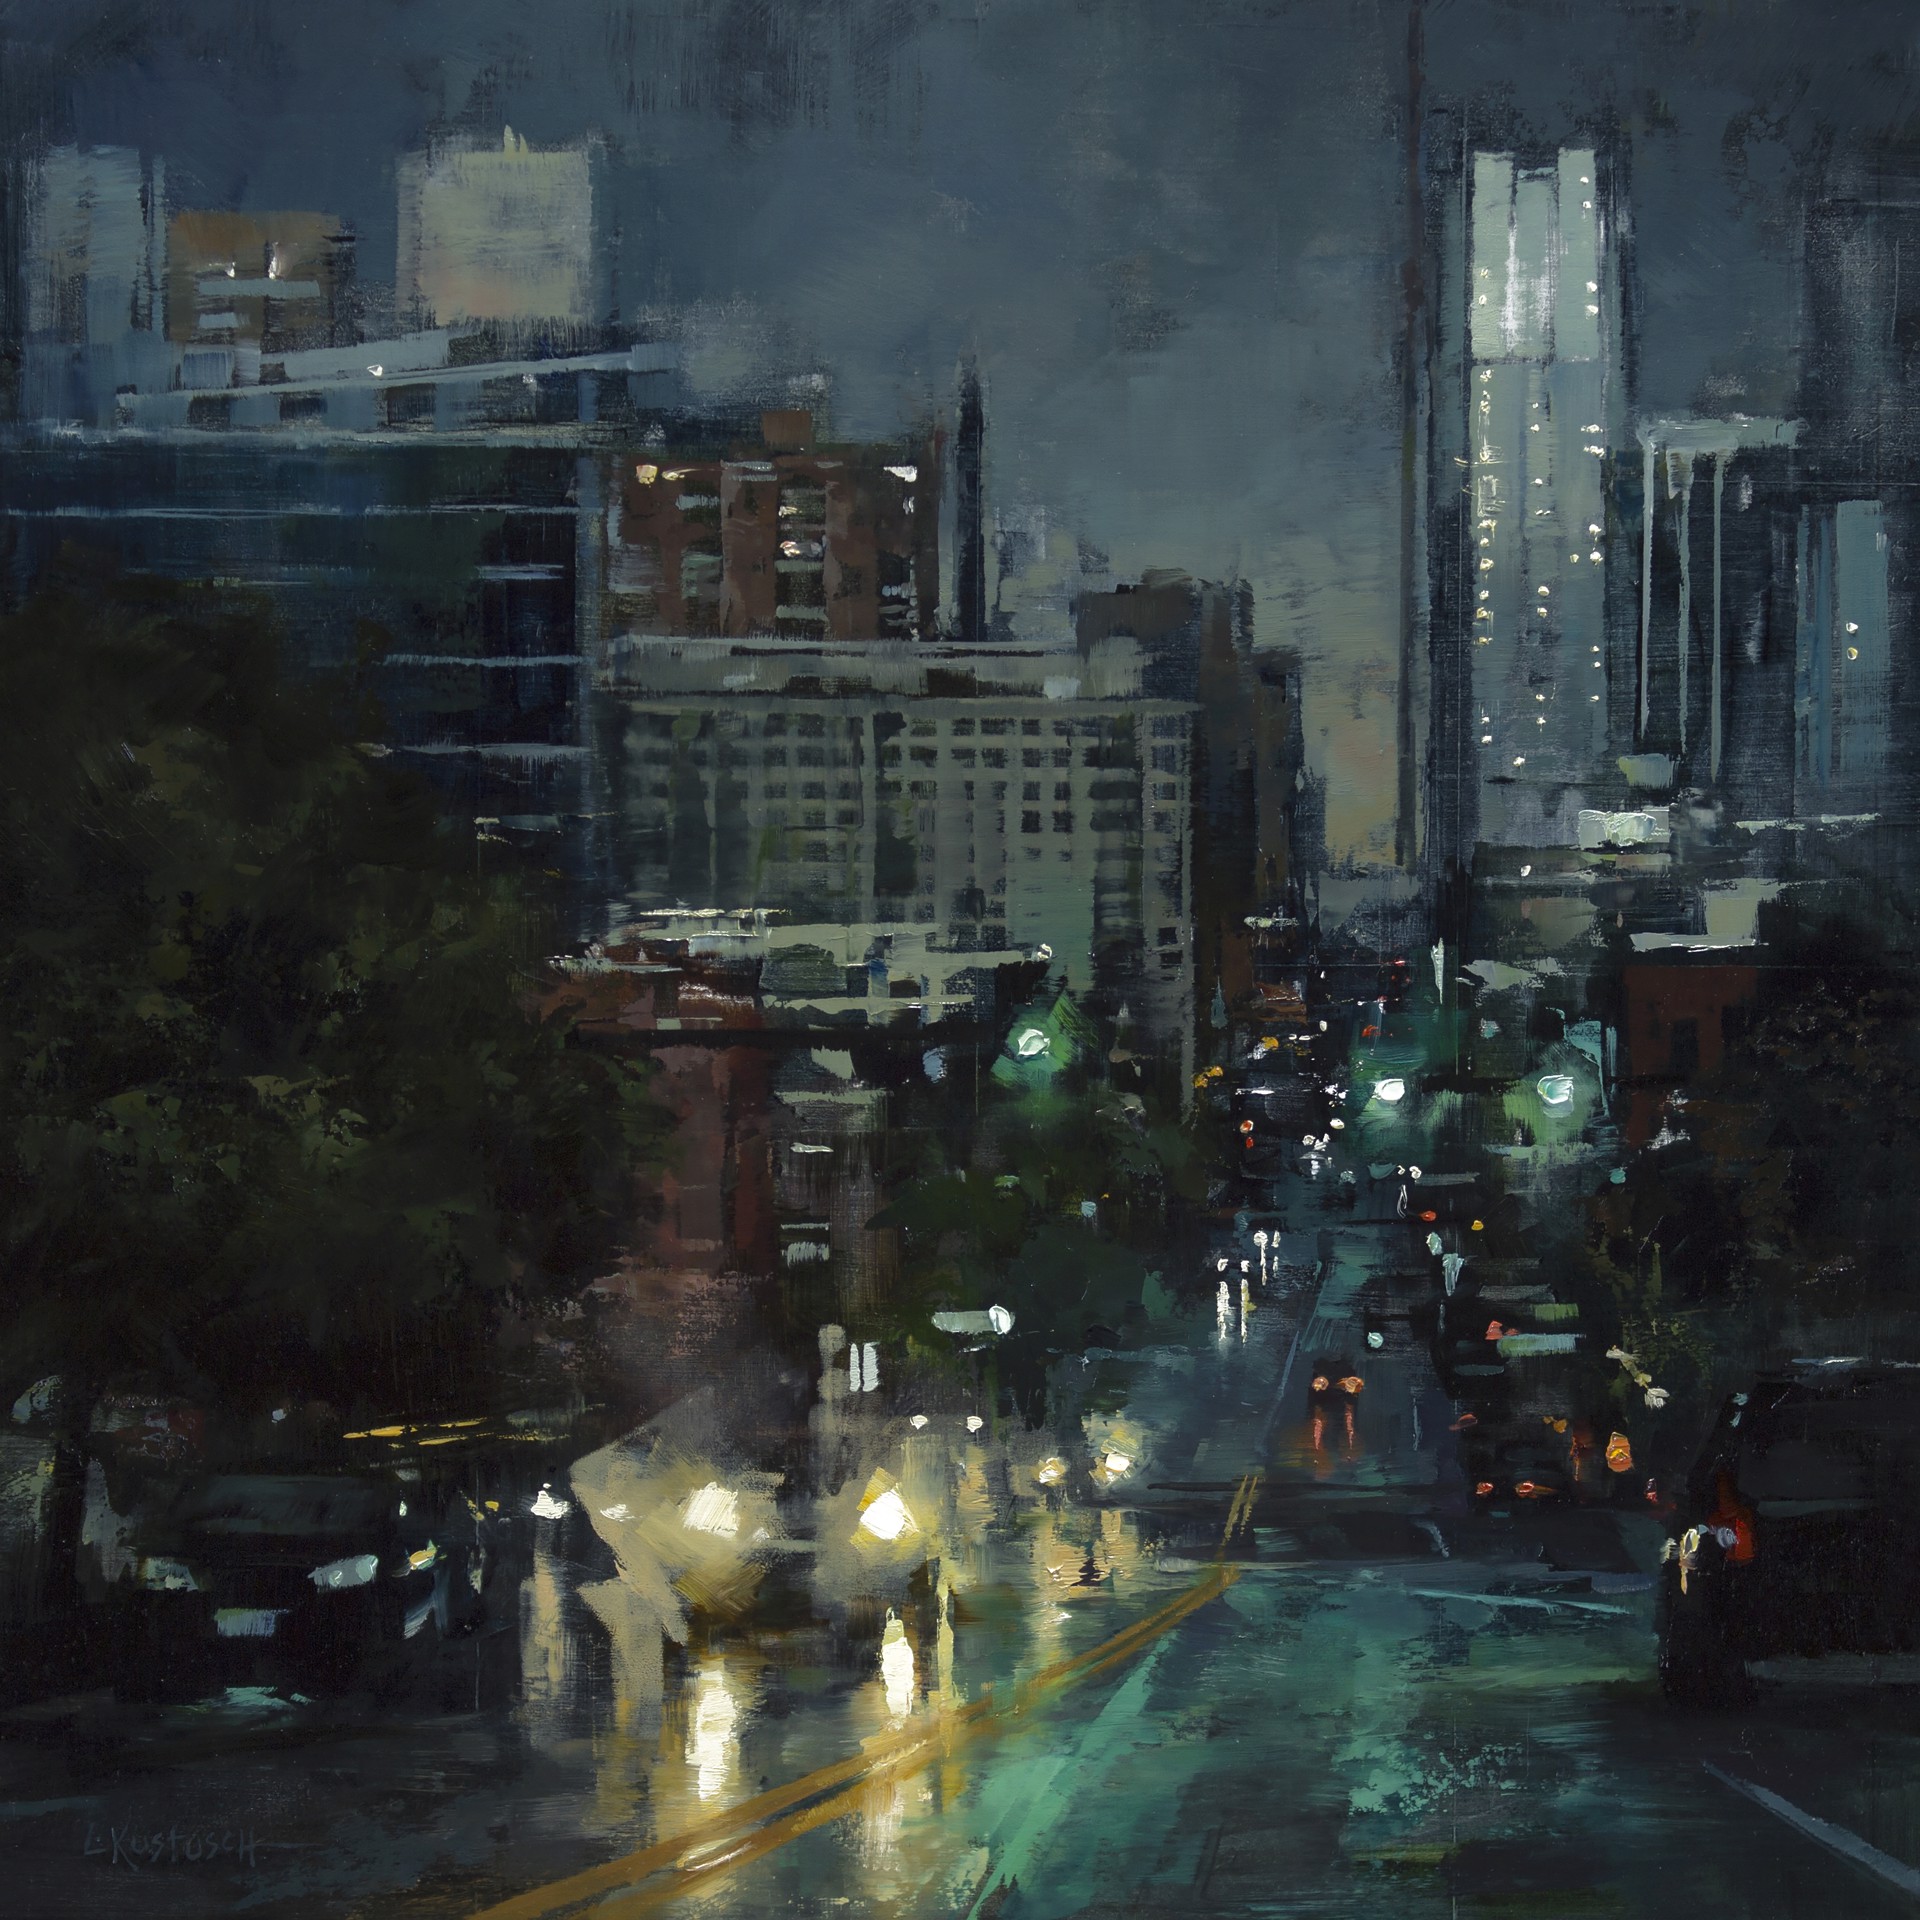 The City at Dusk by Lindsey Kustusch